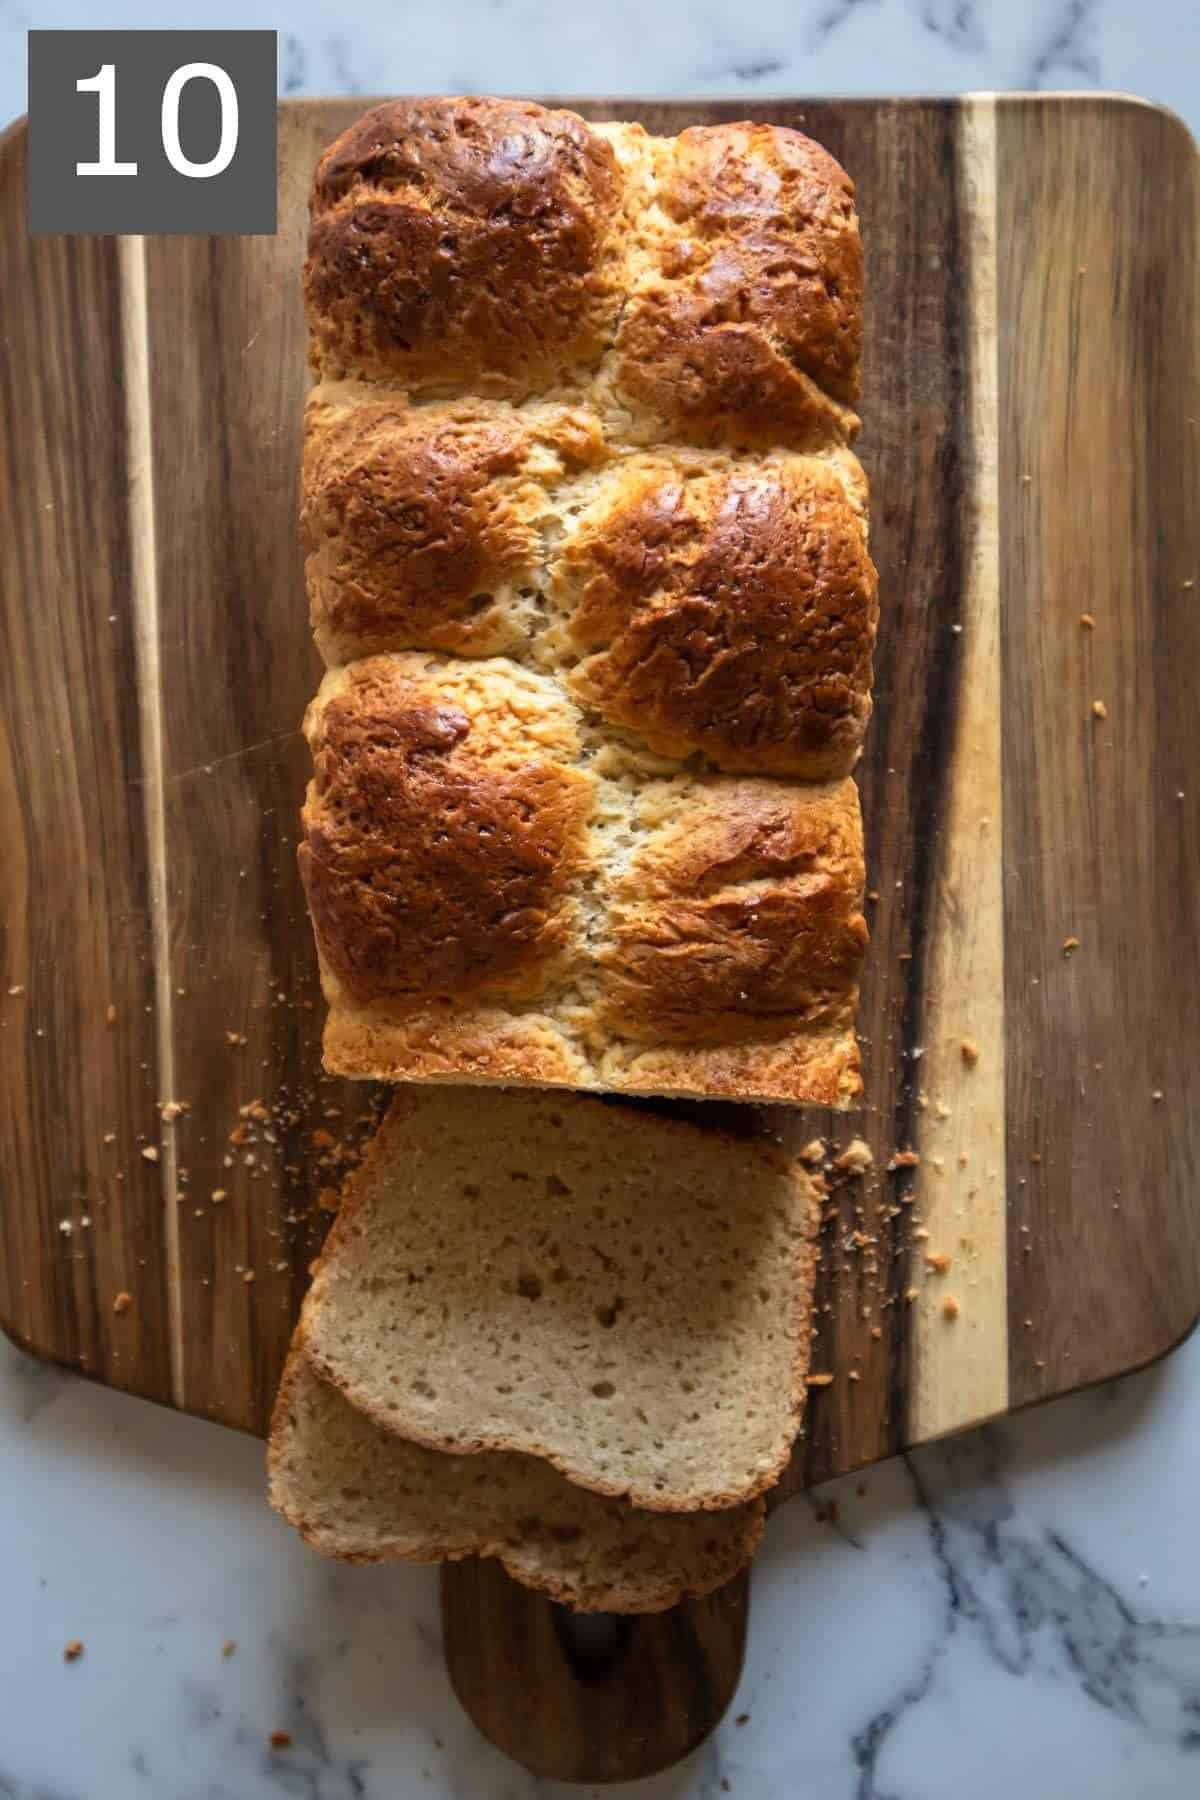 Baked and sliced gluten-free brioche loaf.